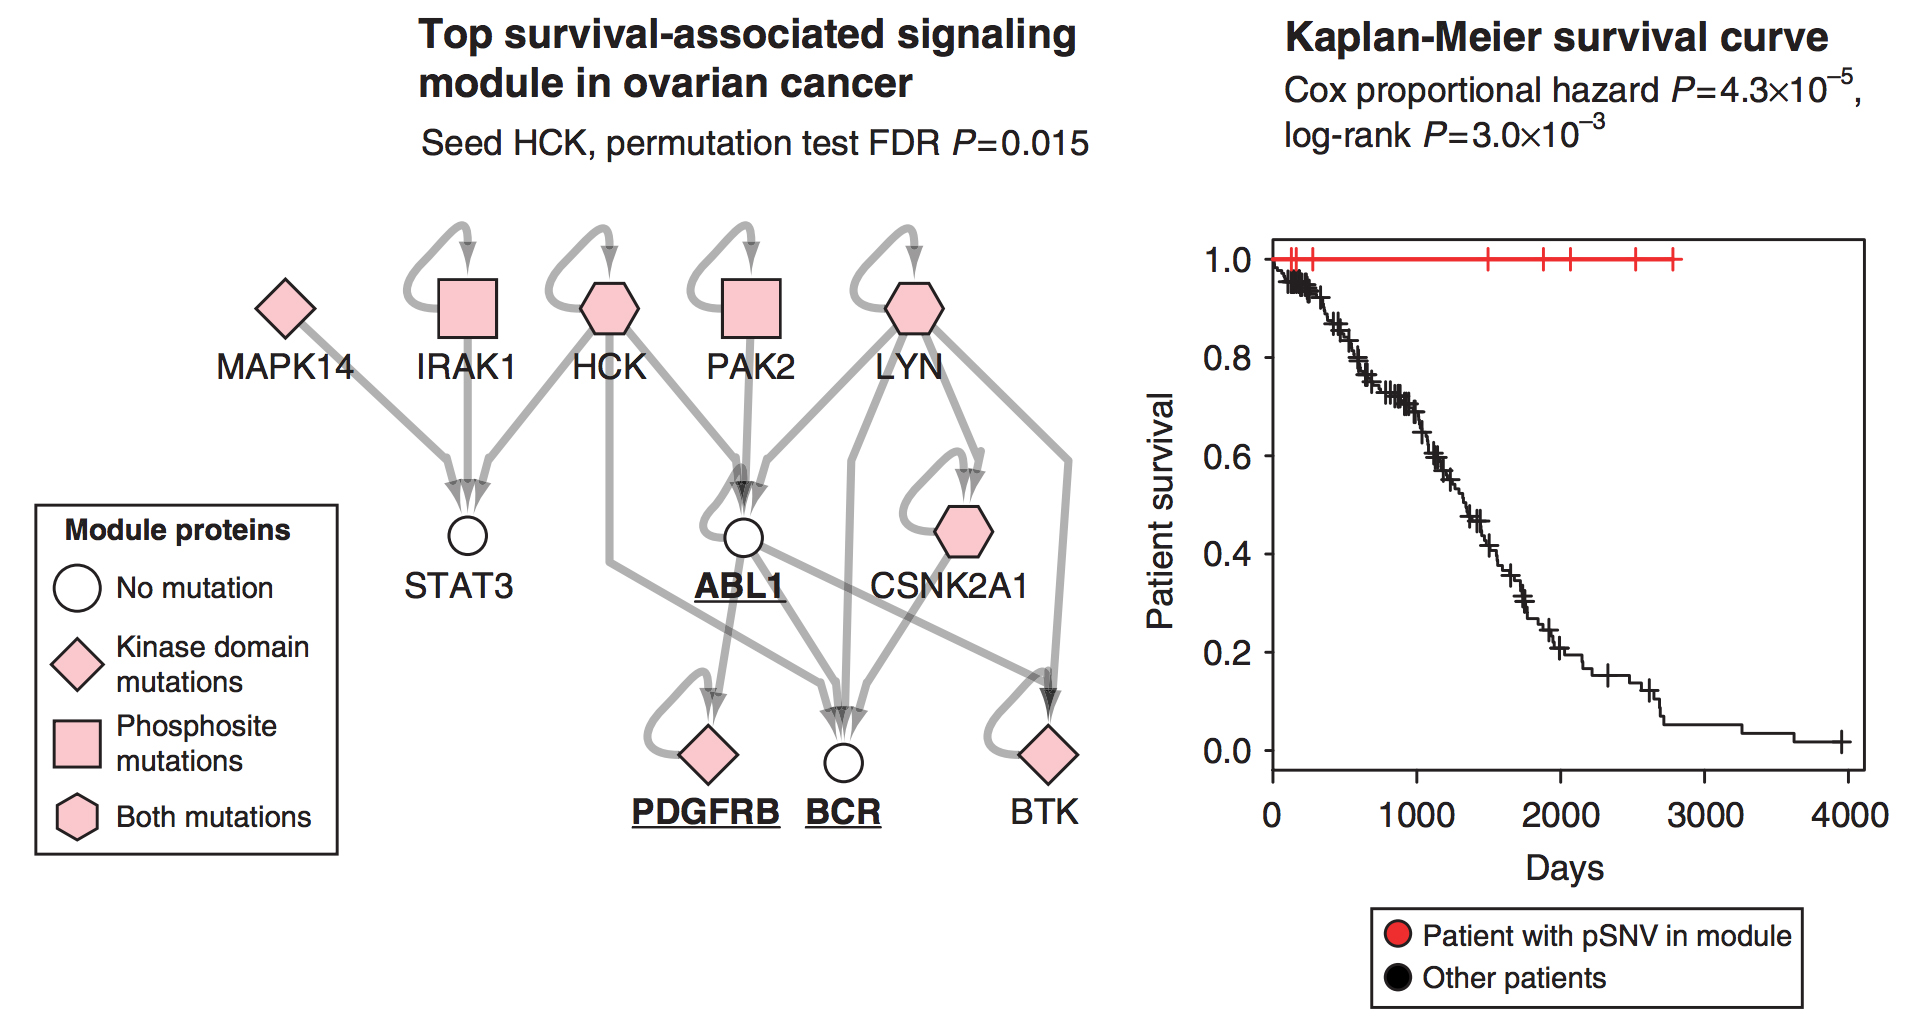 A PATHWAY WHOSE MUTATIONS ARE CORRELATED WITH IMPROVED SURVIVAL IN OVARIAN CANCER